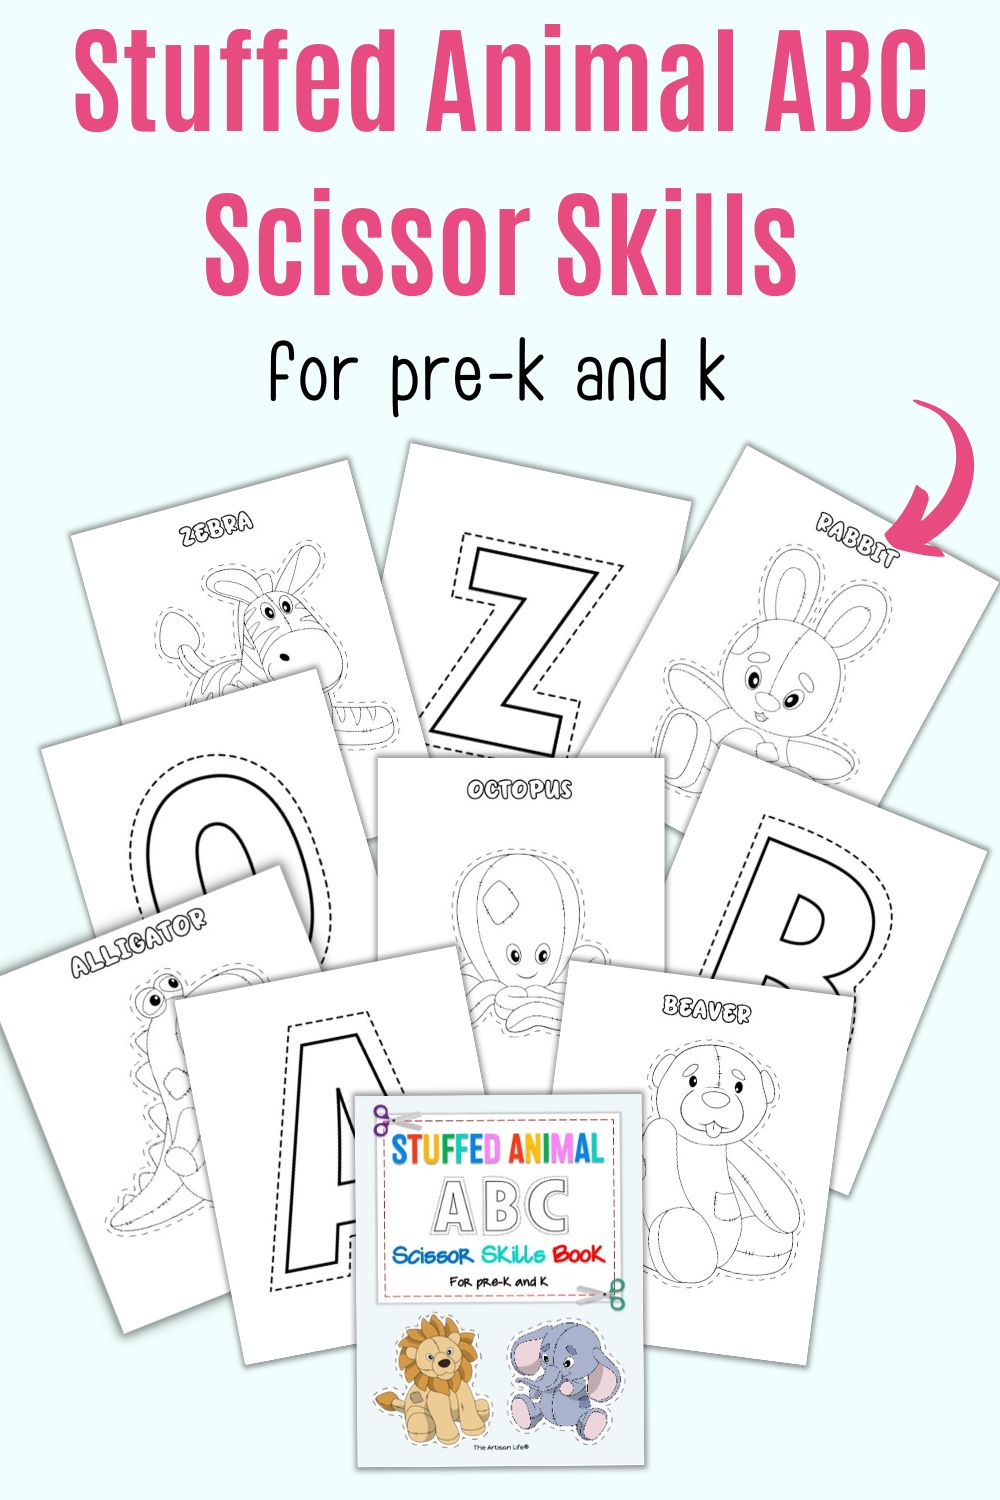 Text "stuffed animal abc scissor skills for pre-k and k" with previews of stuffed animal and alphabet cut and color pages